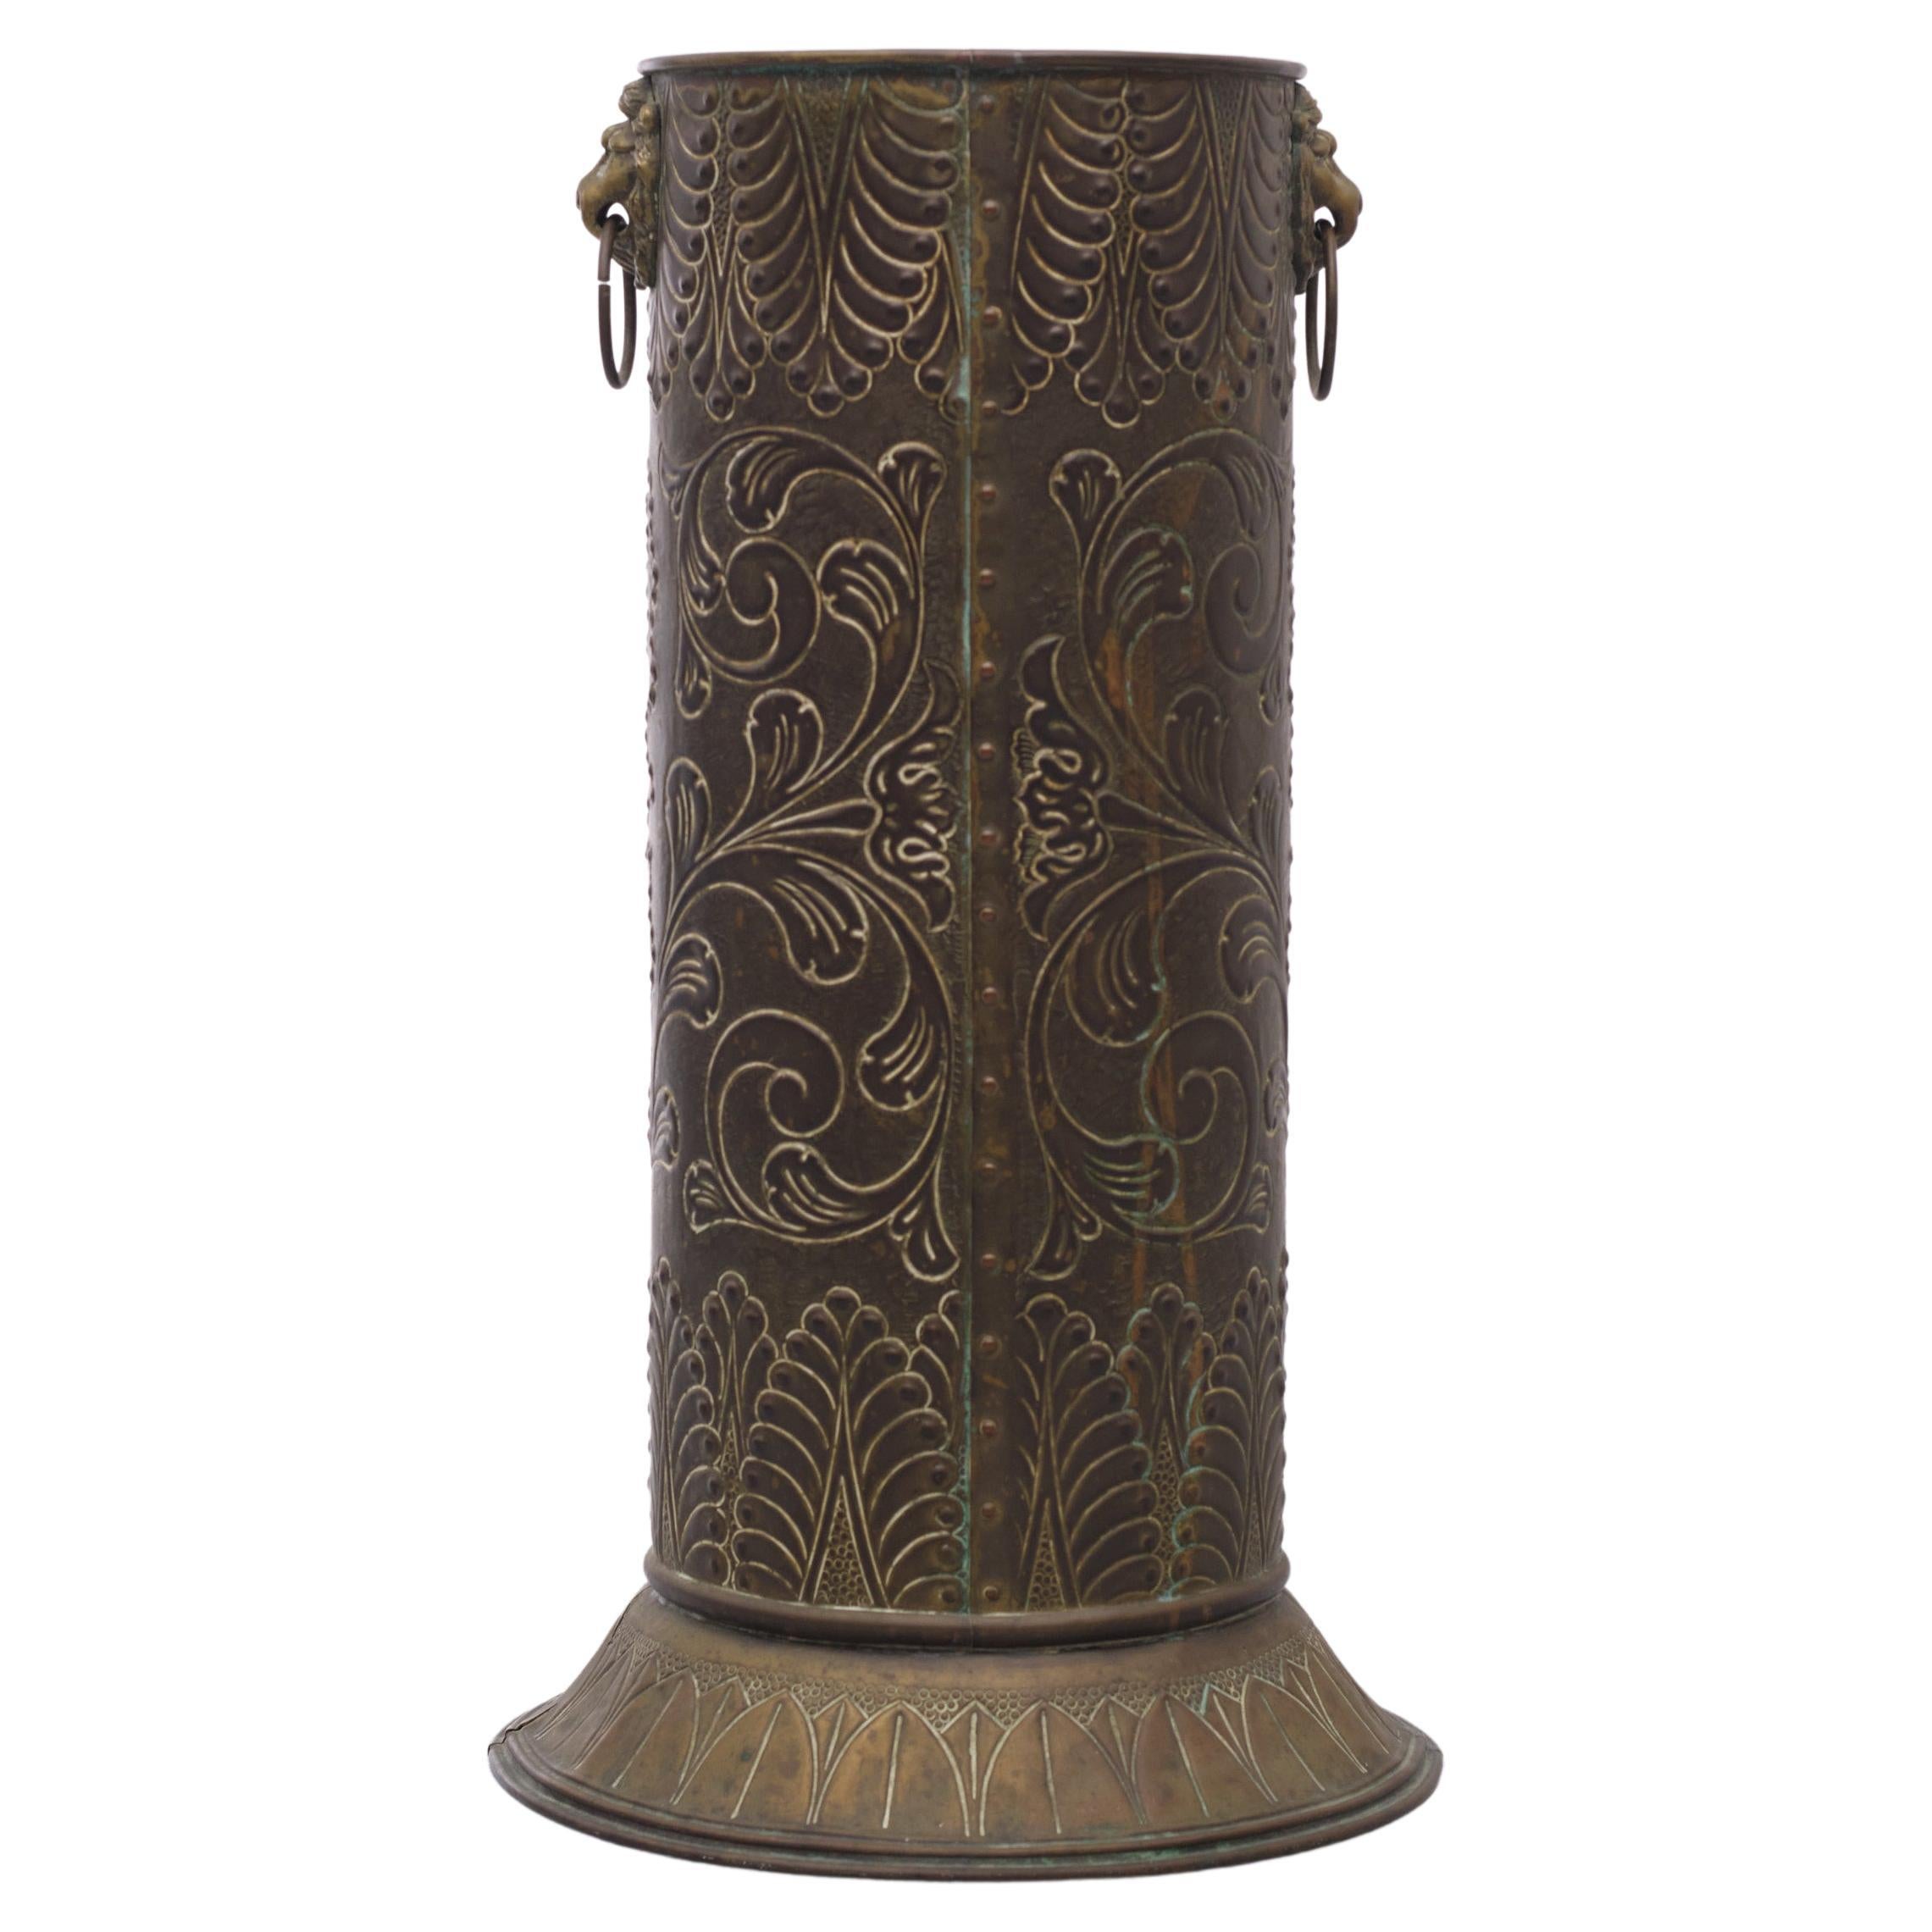 Very nice antique dutch brass umbrella stand. Embossed brass.
Two lion heads .comes with a typical dutch scene, windmill sailing boat.
Still with its original sink drip tray.